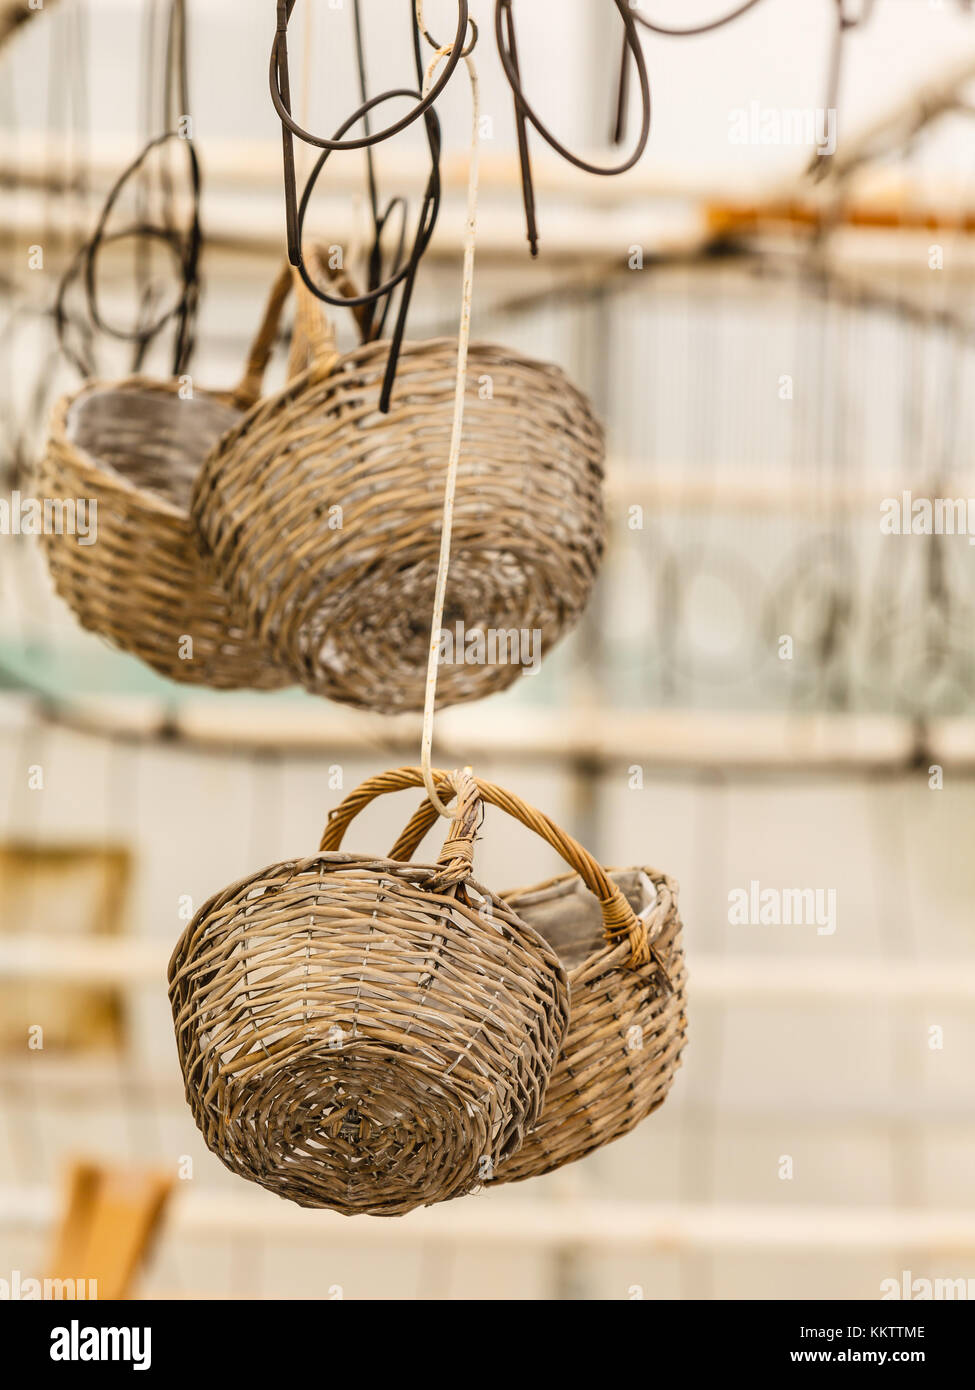 Handmade objects concept. Baskets made of wicker hanging under ceiling in  greenhouse Stock Photo - Alamy